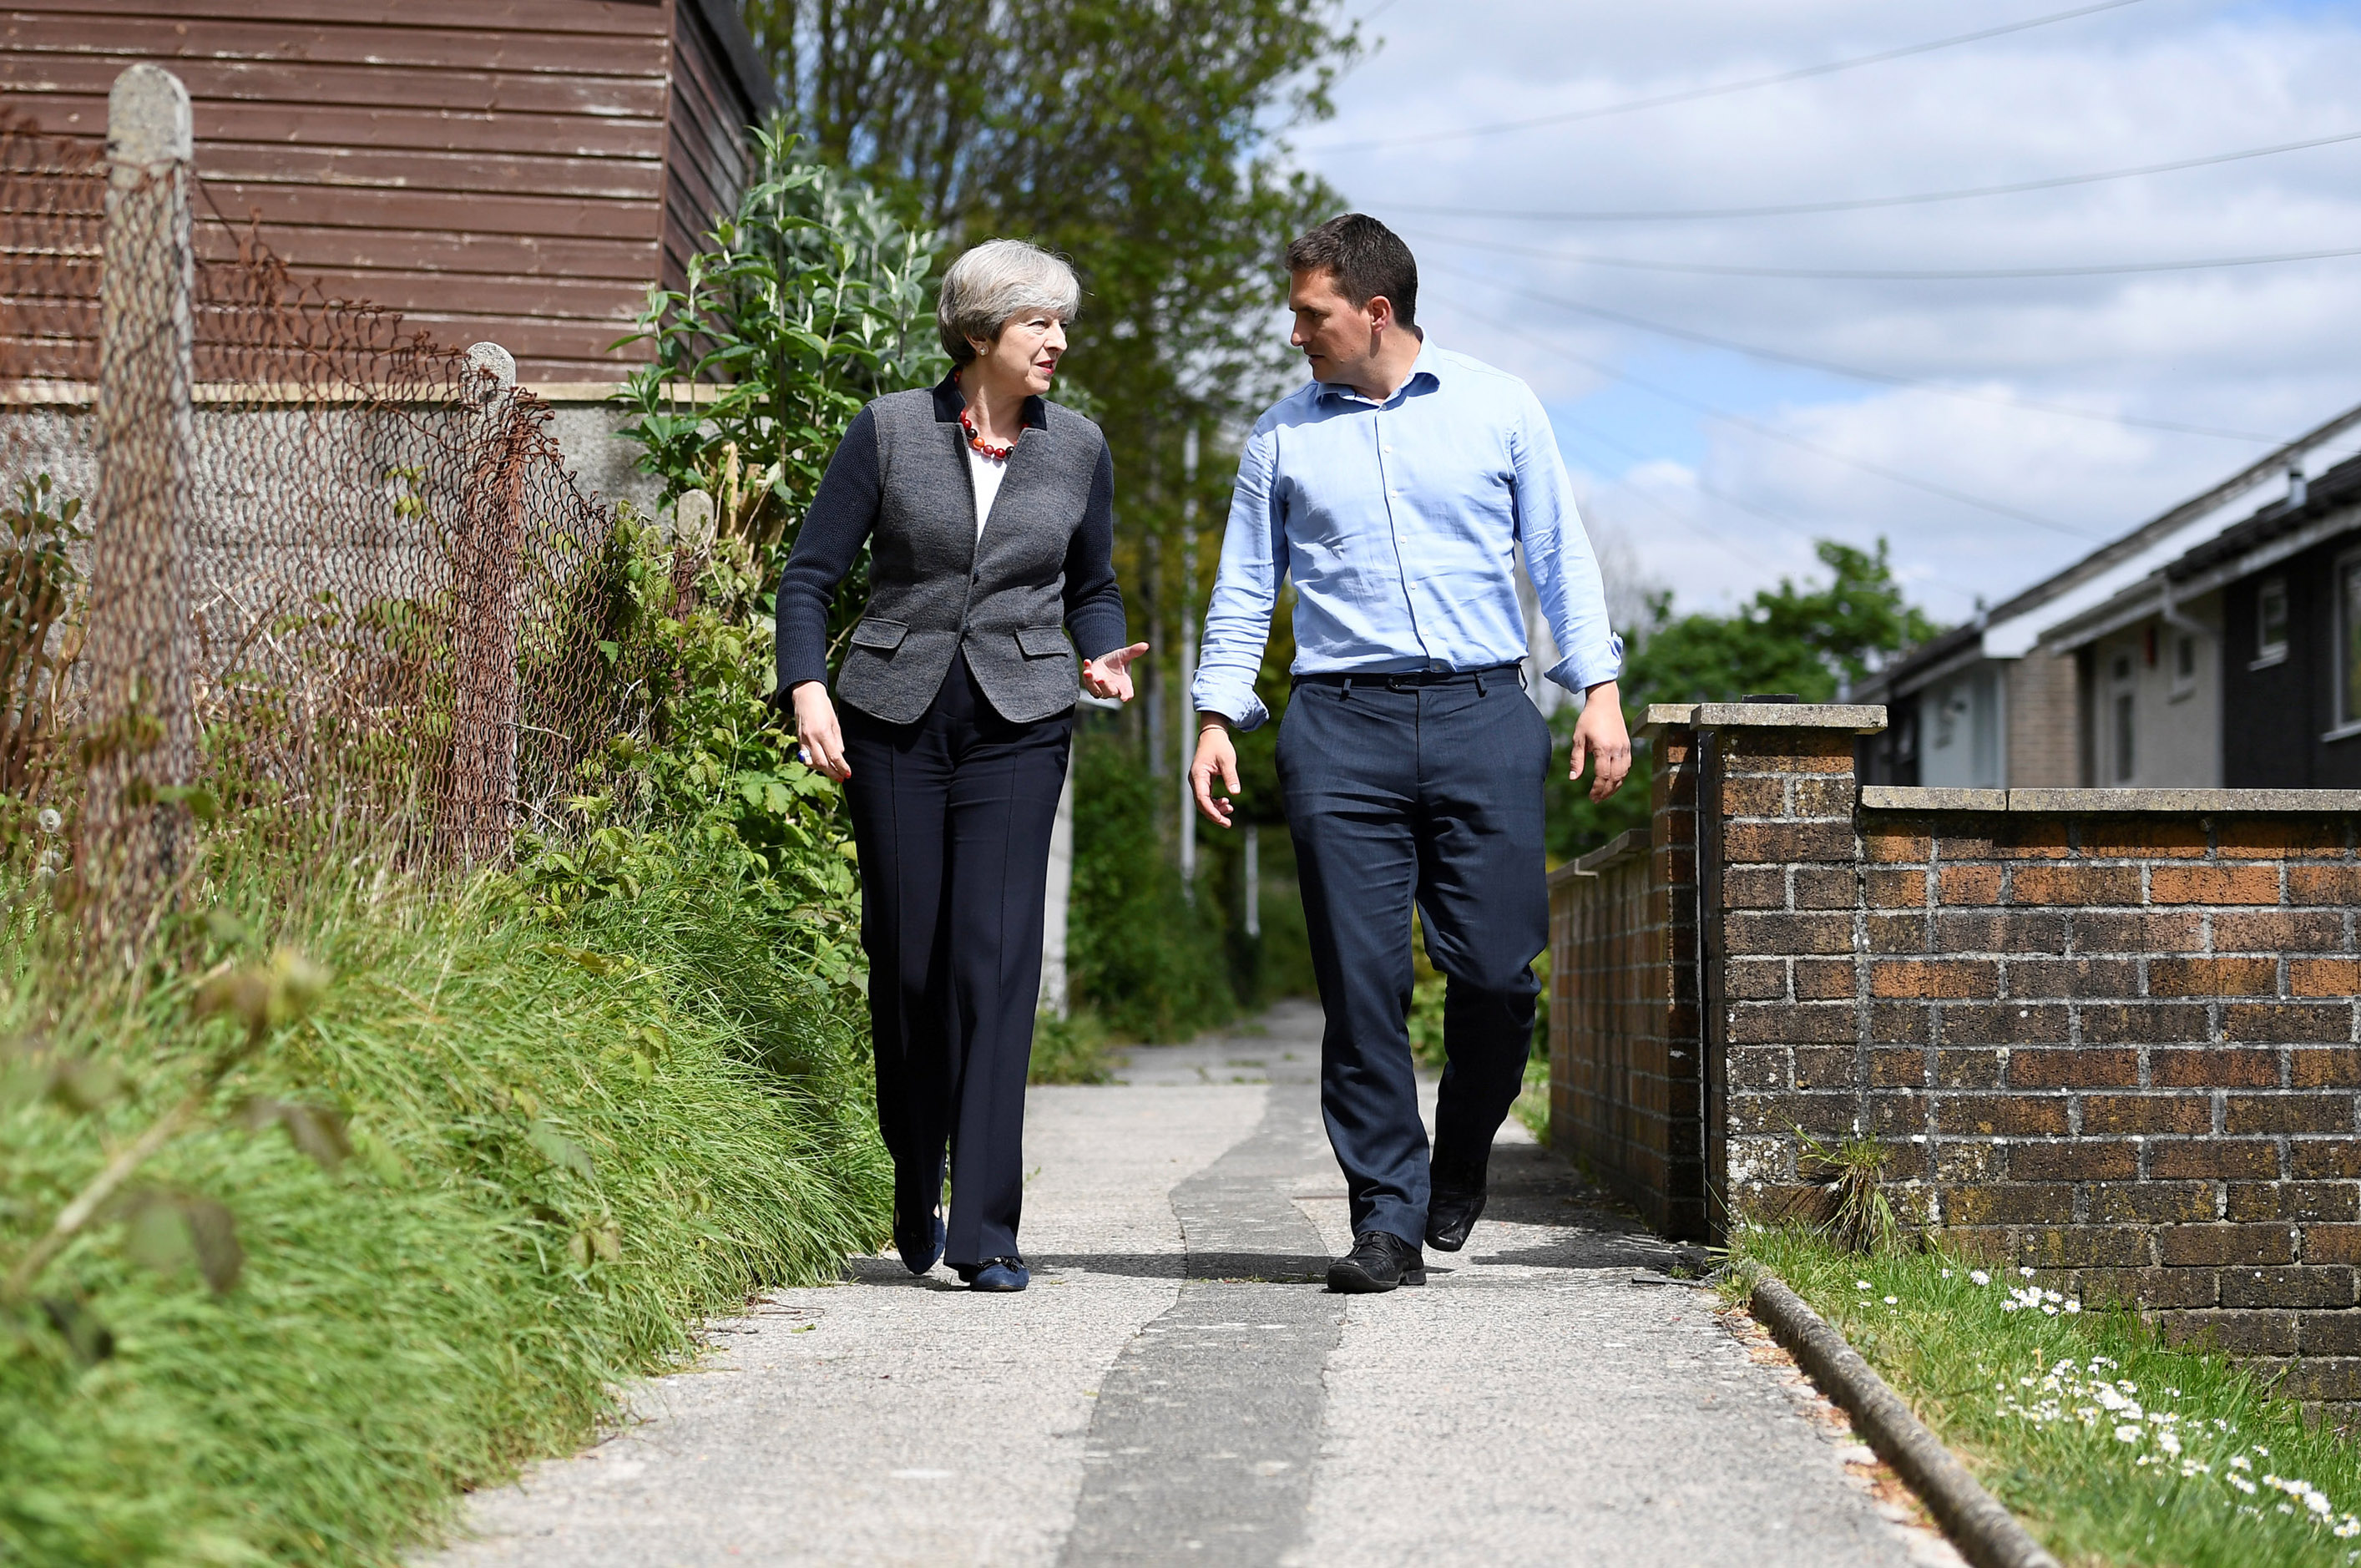 PLYMOUTH, UNITED KINGDOM - MAY 2: Britain's Prime Minister Theresa May walks with local Conservative Party candidate Johnny Mercer during a campaign visit on May 2, 2017 in Plymouth, England. The Prime Minister is campaigning in South-West England, a former Liberal Democrat stronghold, as she urges West Country voters to stick with her party ahead of the polls on June 8. (Photo by Dylan Martinez/WPA Pool/Getty Images)